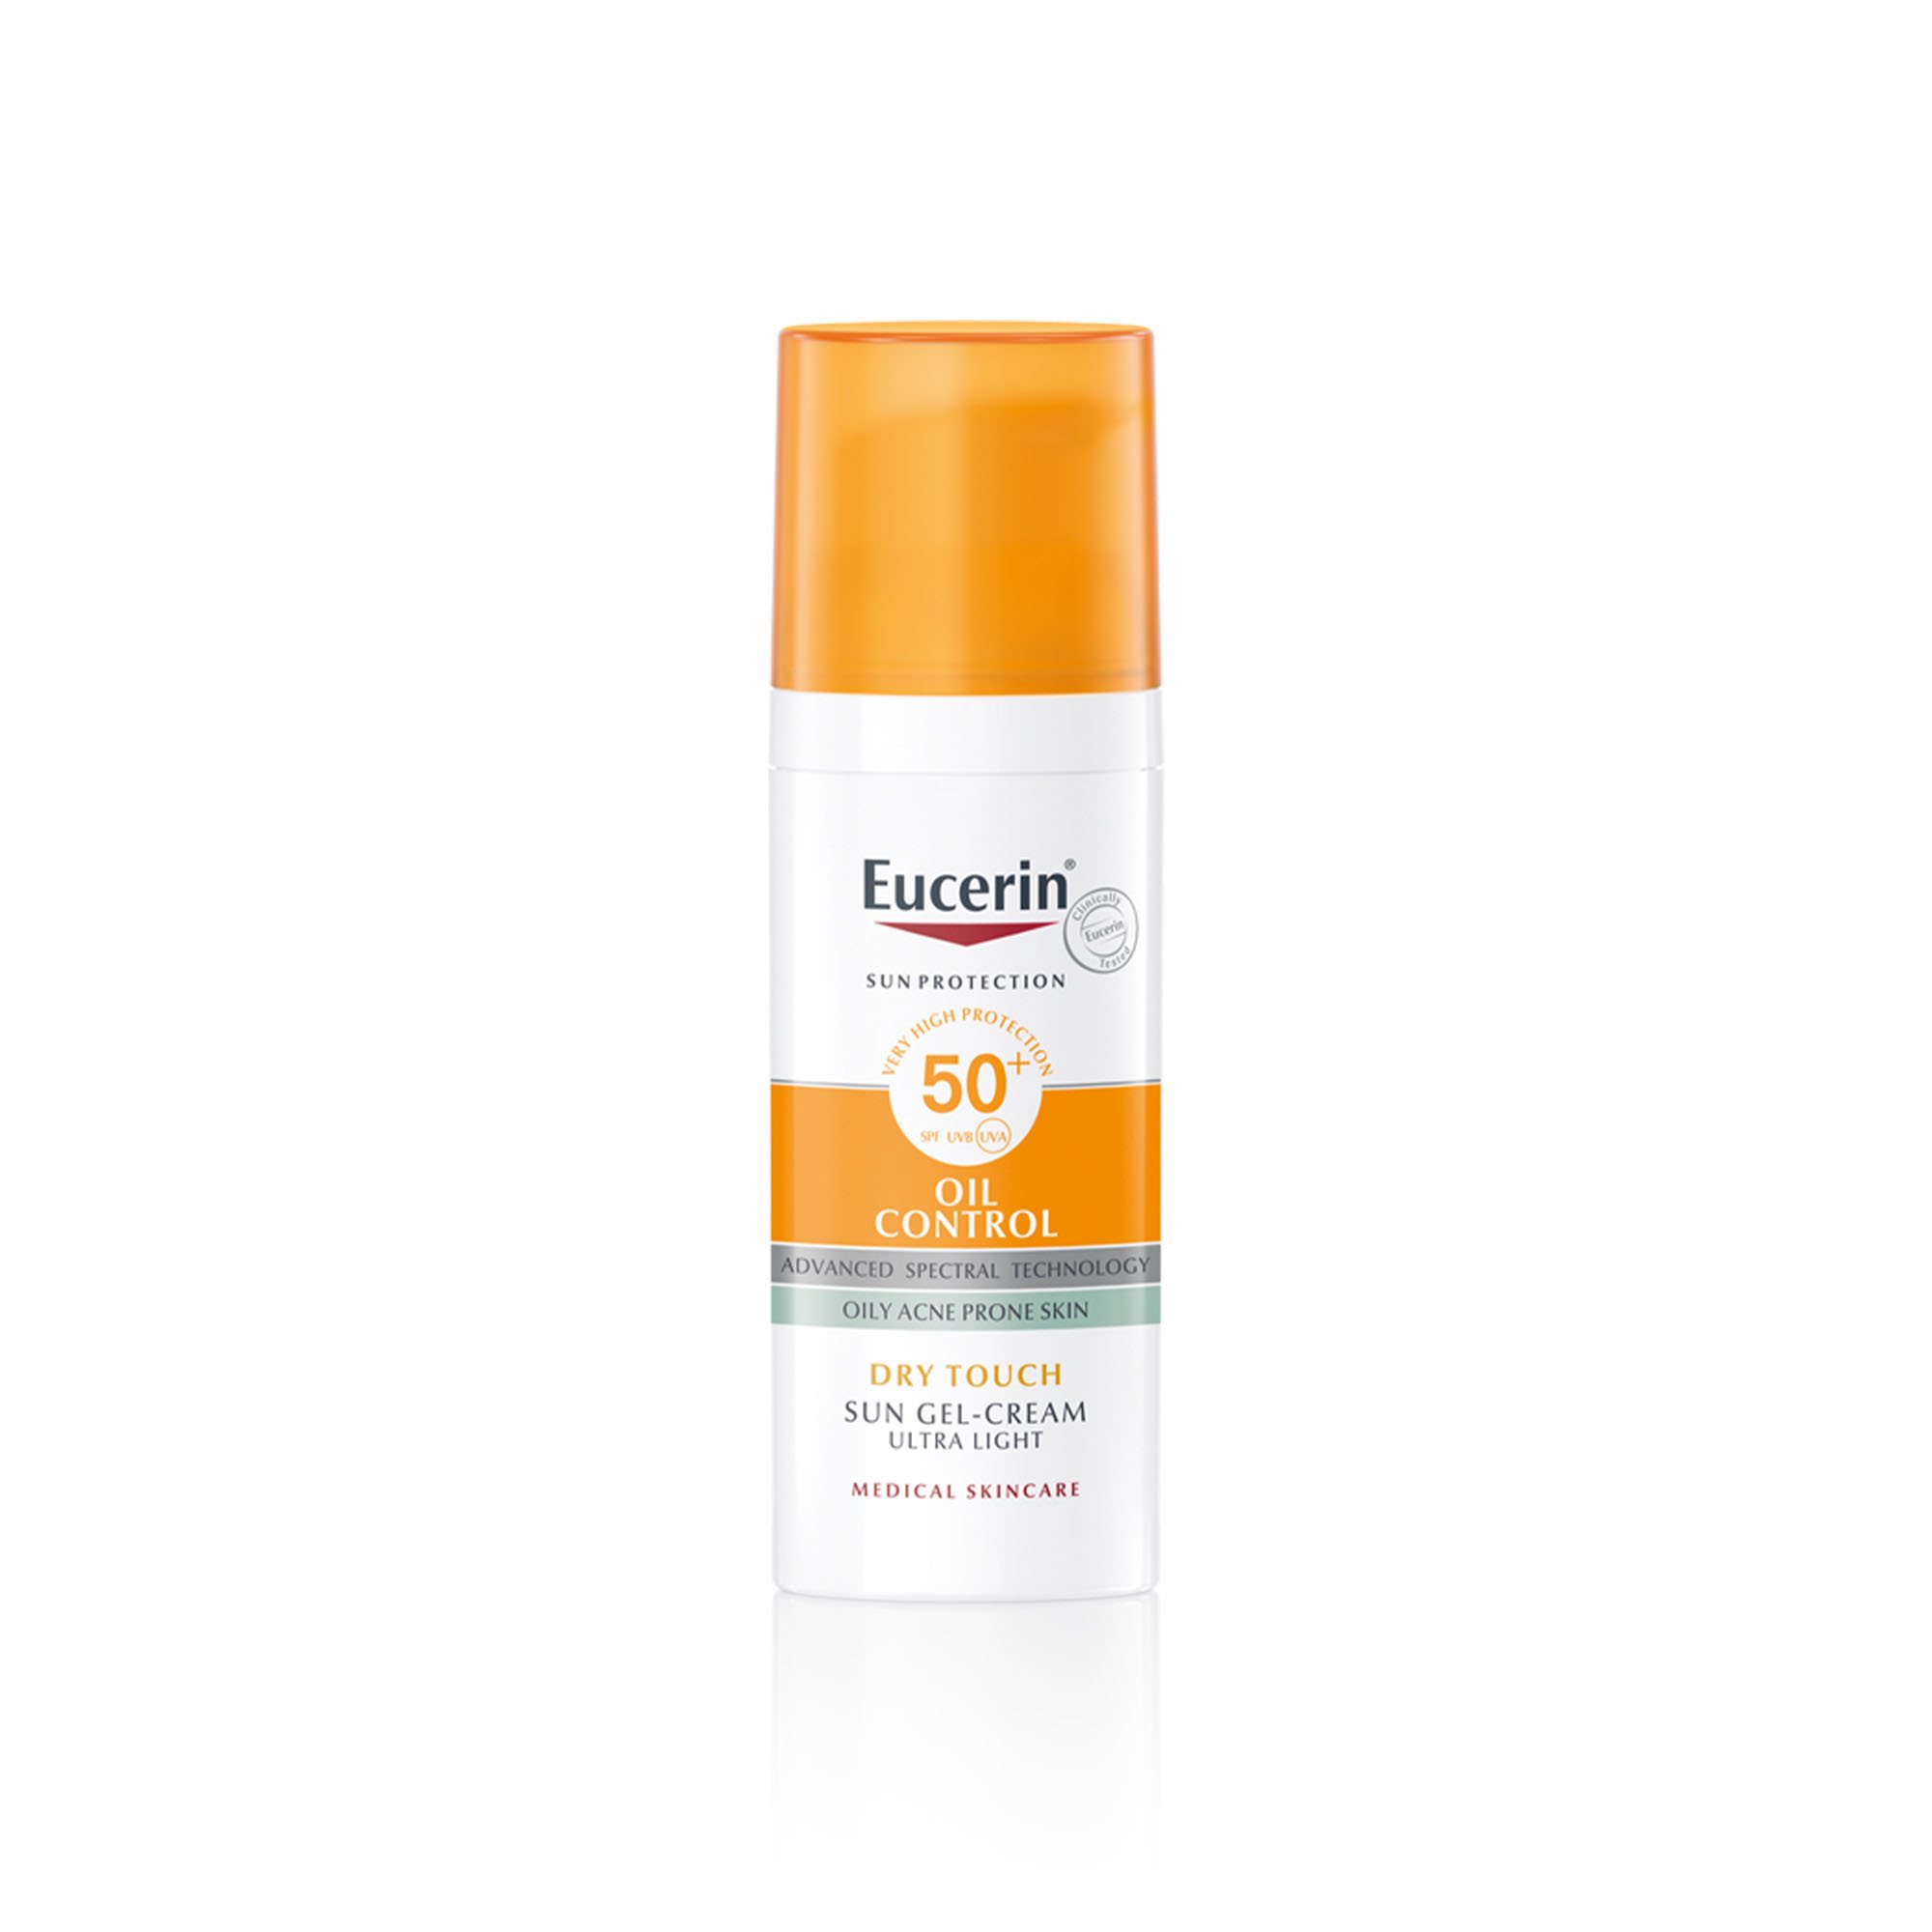 Sun Gel-Creme Oil Control Dry Touch SPF 50+